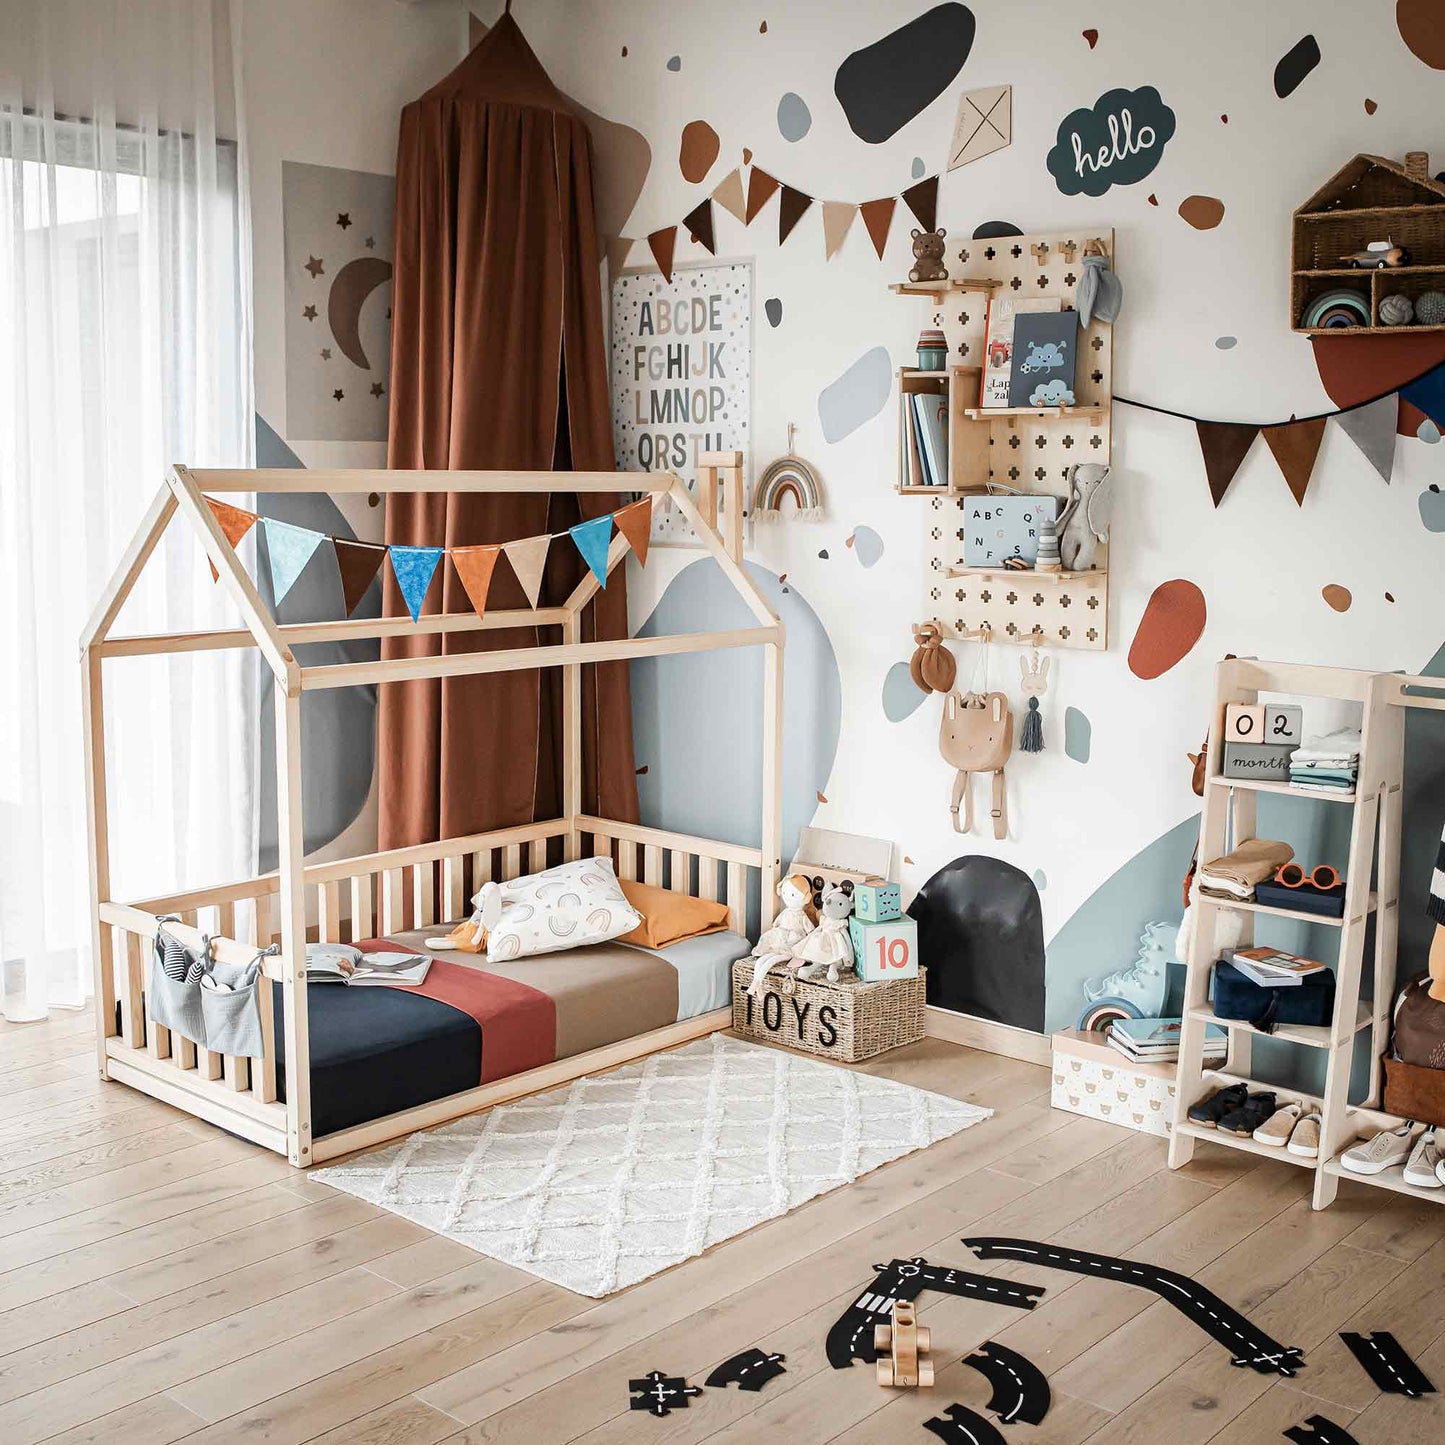 A child's bedroom featuring a Kids' house-frame bed with 3-sided rails, bright pillows, a toy chest, shelves, and wall decorations including a banner, alphabet chart, and various art pieces.